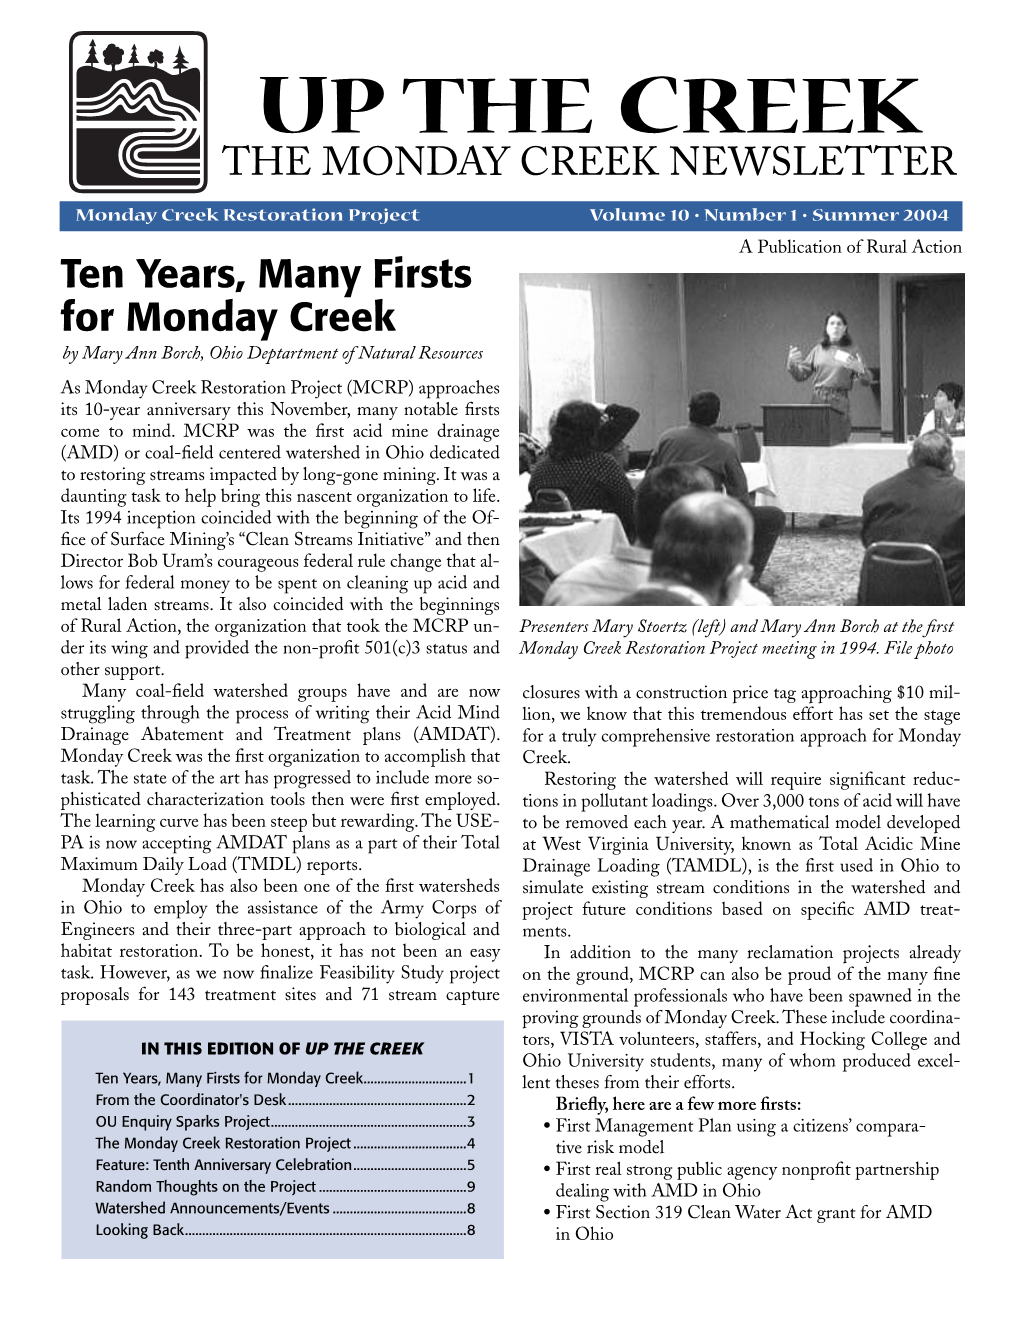 “Up the Creek” – Summer 2004